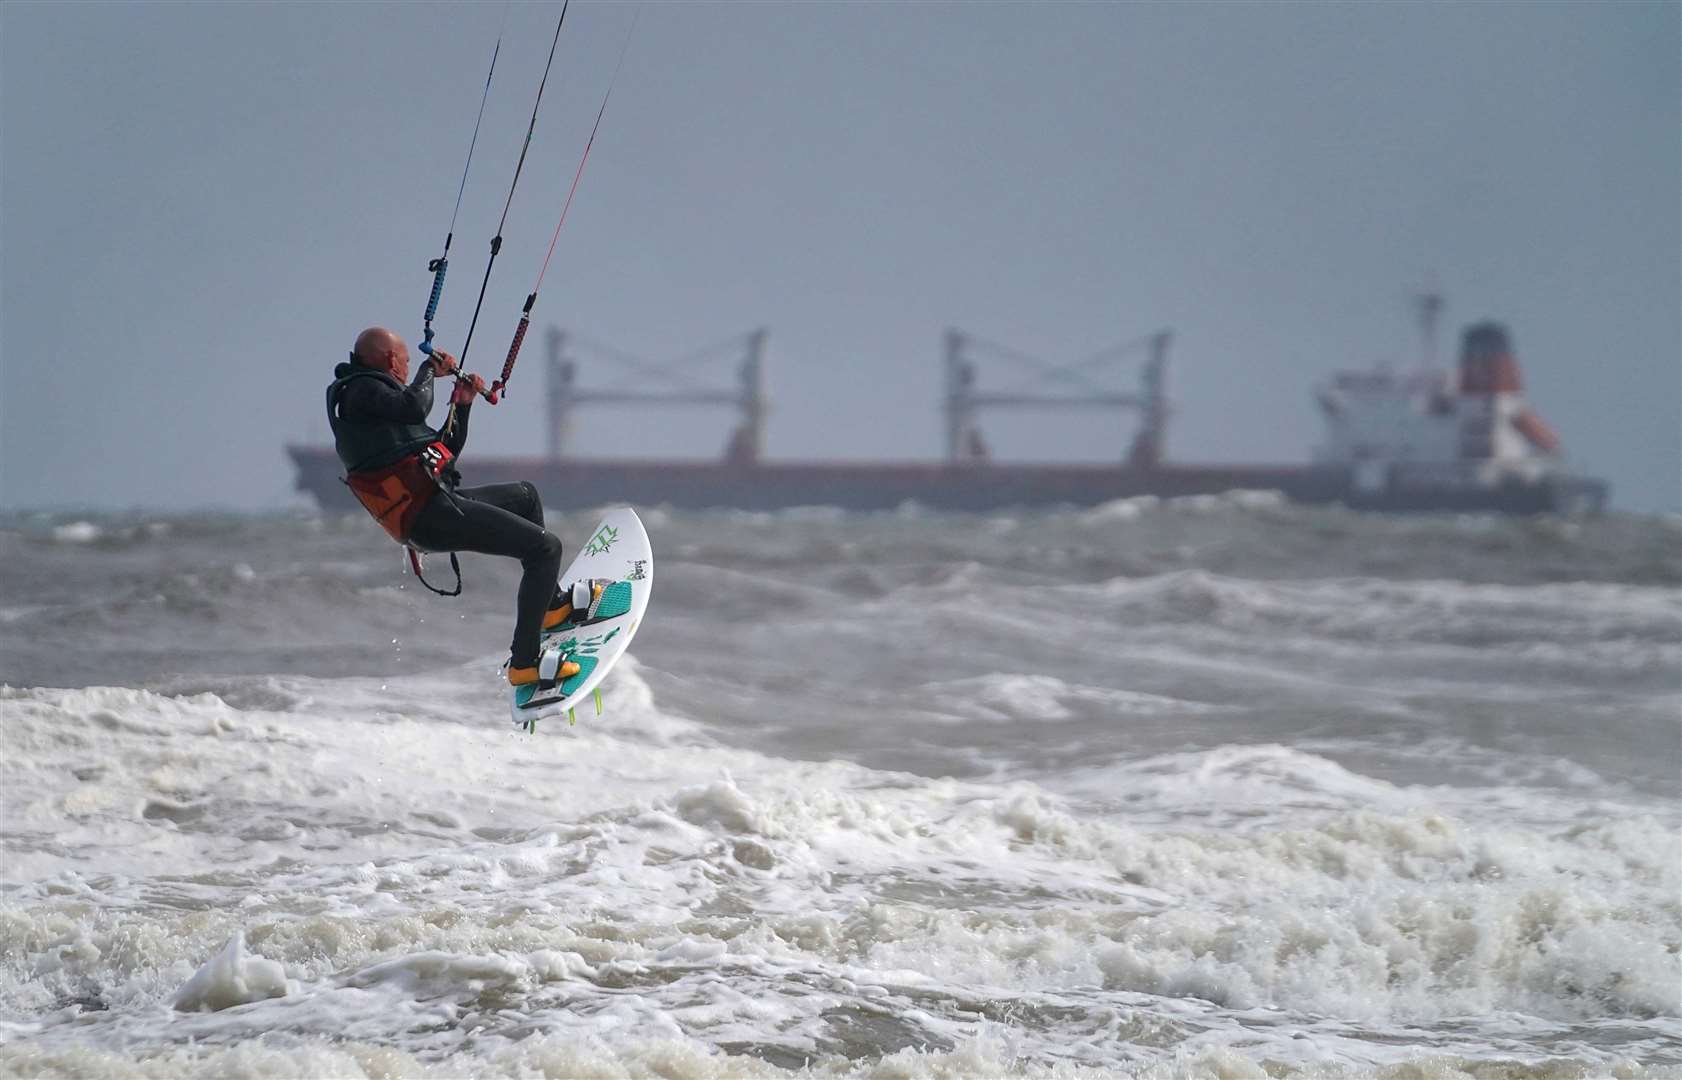 But it wasn’t all bad – kite surfers took full advantage of the stormy conditions last week off Tynemouth beach (Owen Humphreys/PA)